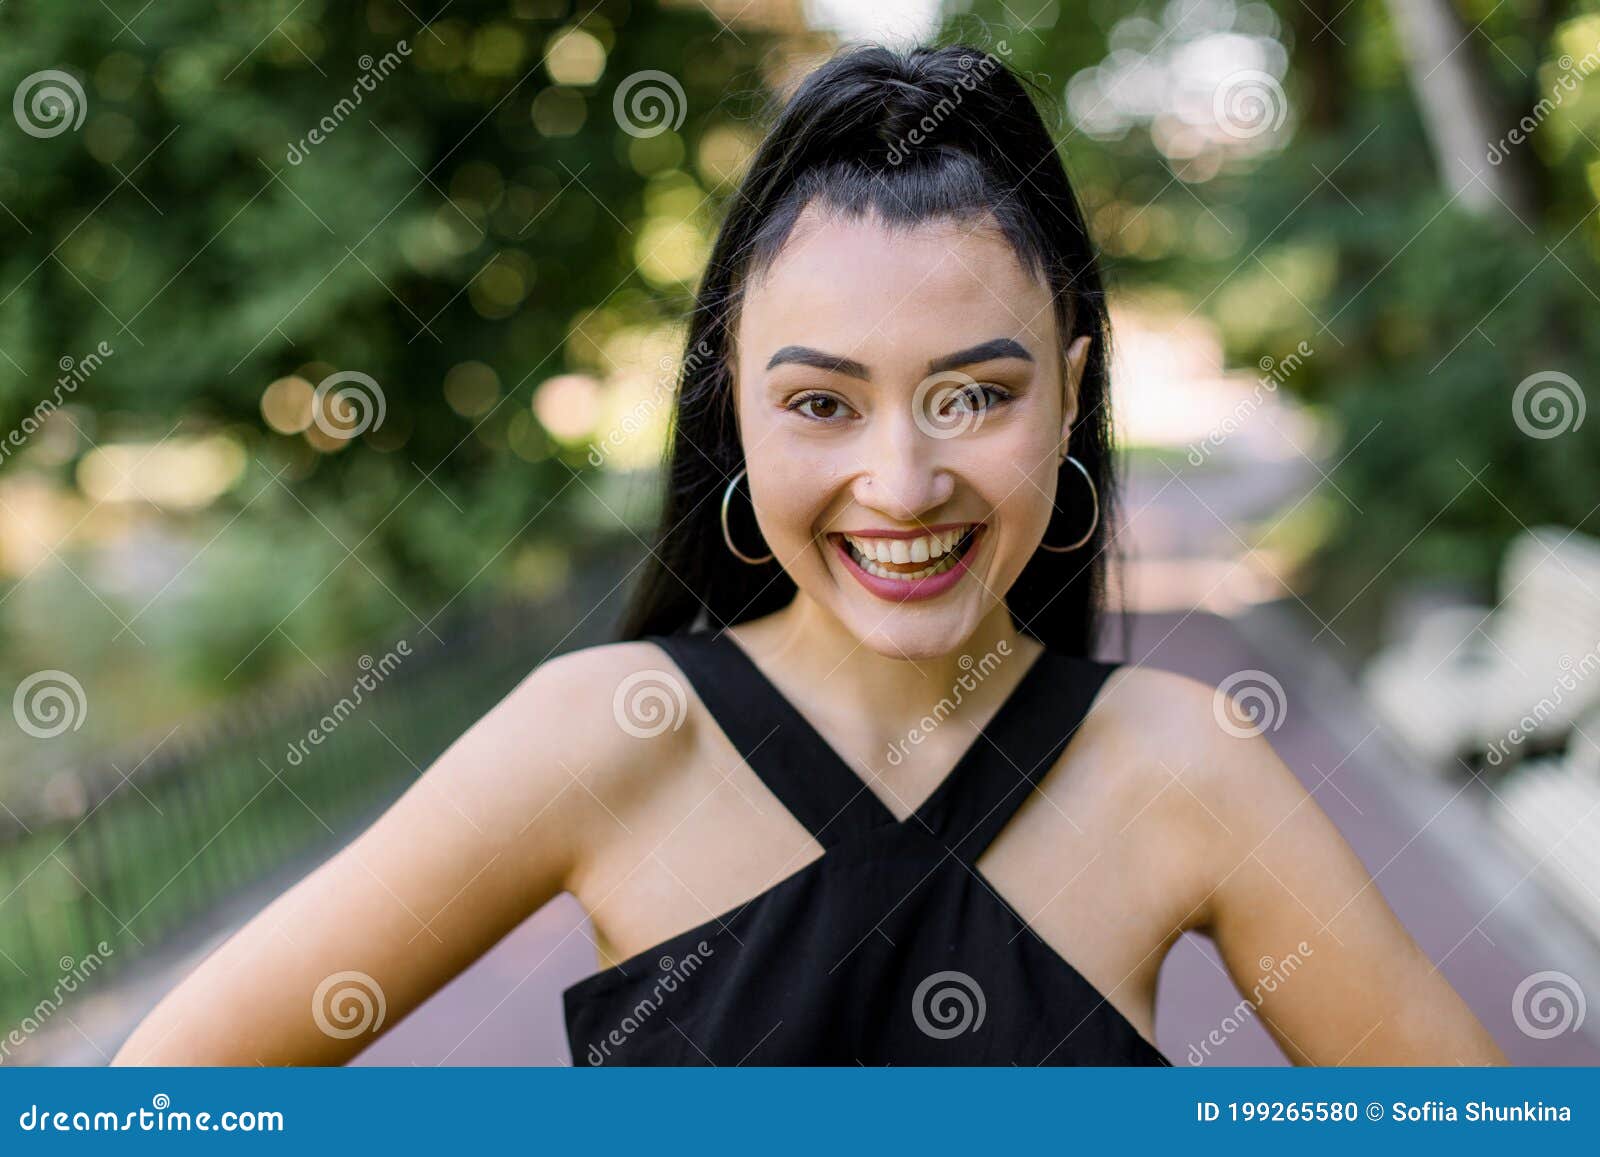 Portrait of Smiling Attractive Asian Girl with Ponytail Black Hair, Wearing  Summer Black Outfit, Relaxing and Enjoying Stock Photo - Image of face,  beauty: 199265580